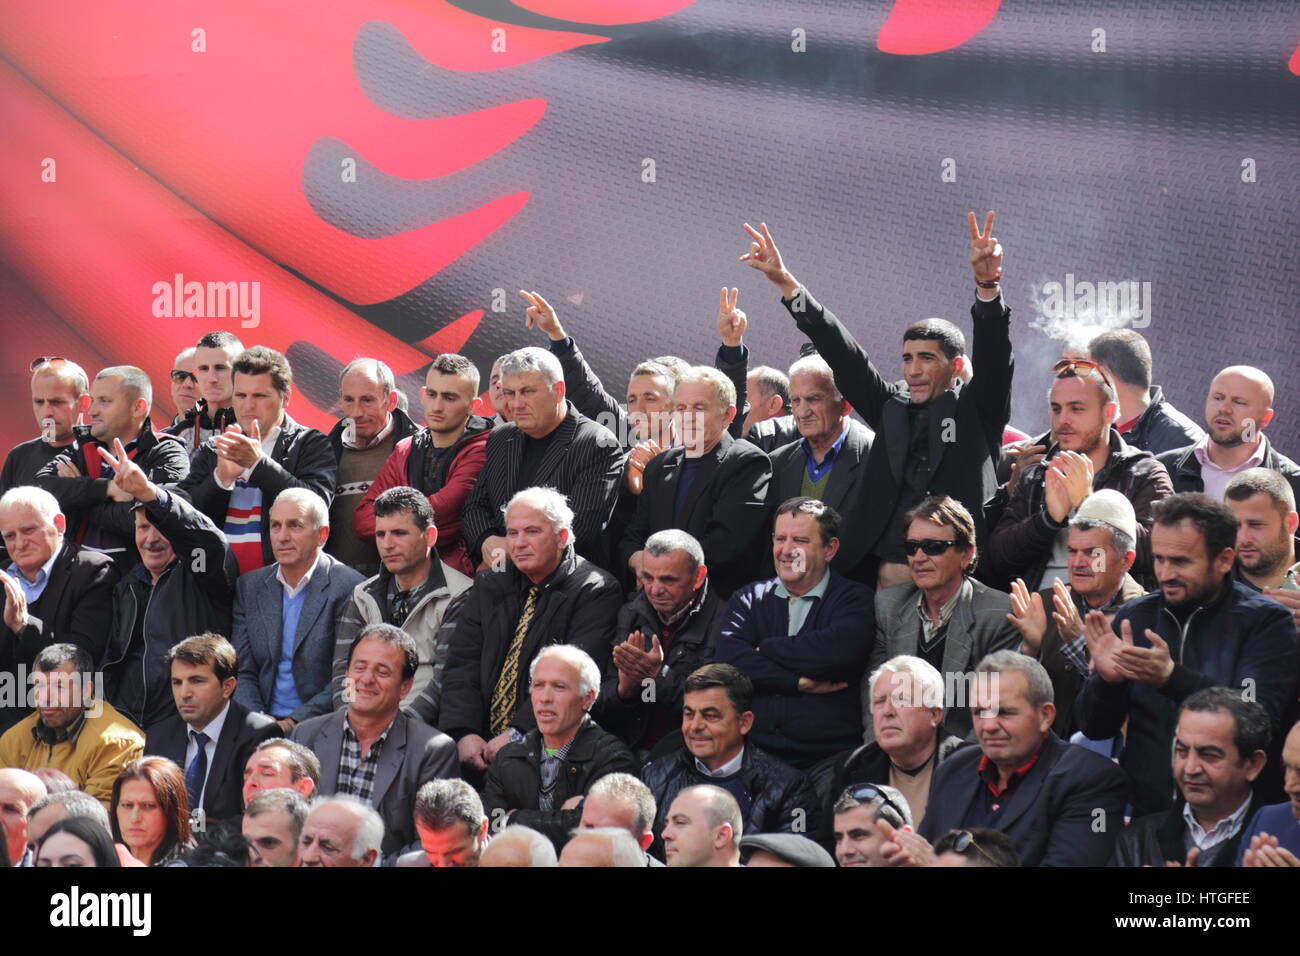 Tirana, Albania 11 March 2017. Political rally of Democratic Party of Albania in the course of election campaign 2017 in Albania: political supporters in the crowd Stock Photo